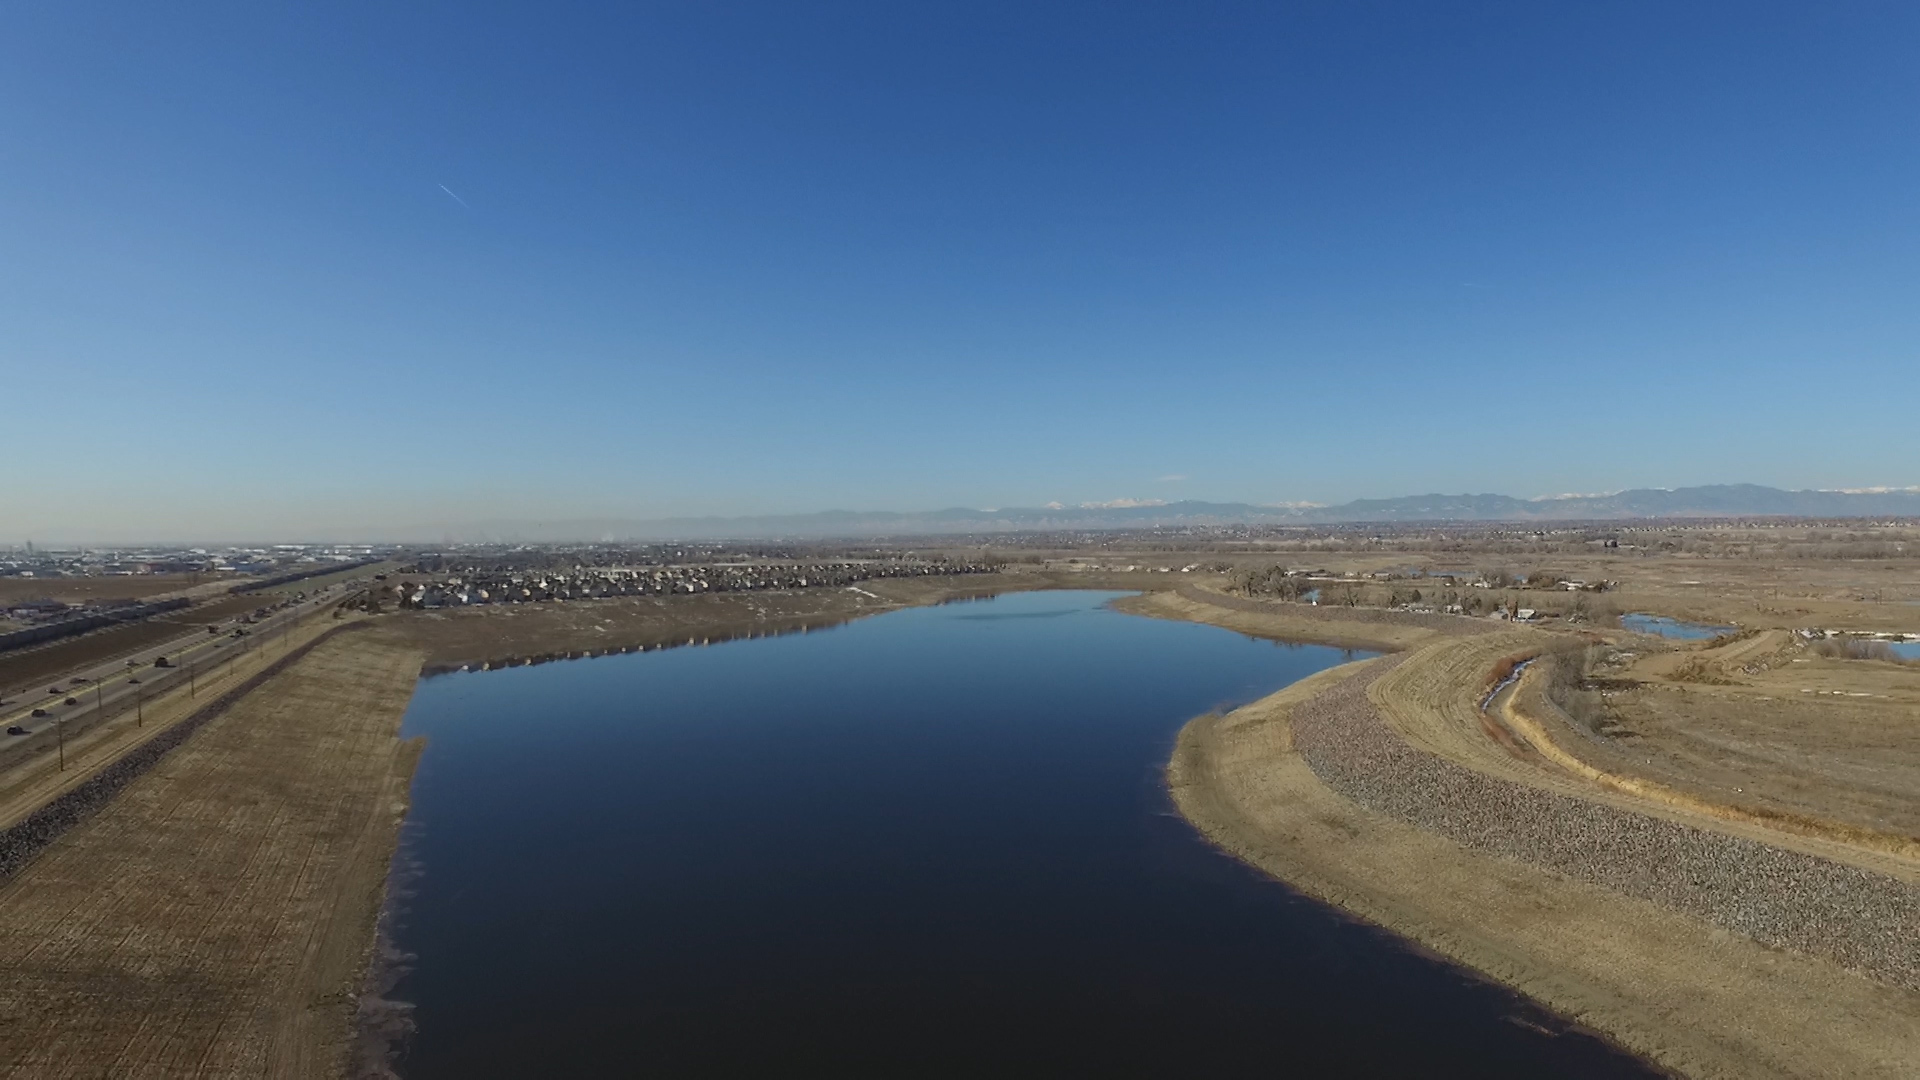 Dunes Reservoir on March 1, 2018. The reservoir will not be used for recreation and water levels will fluctuate throughout the year.